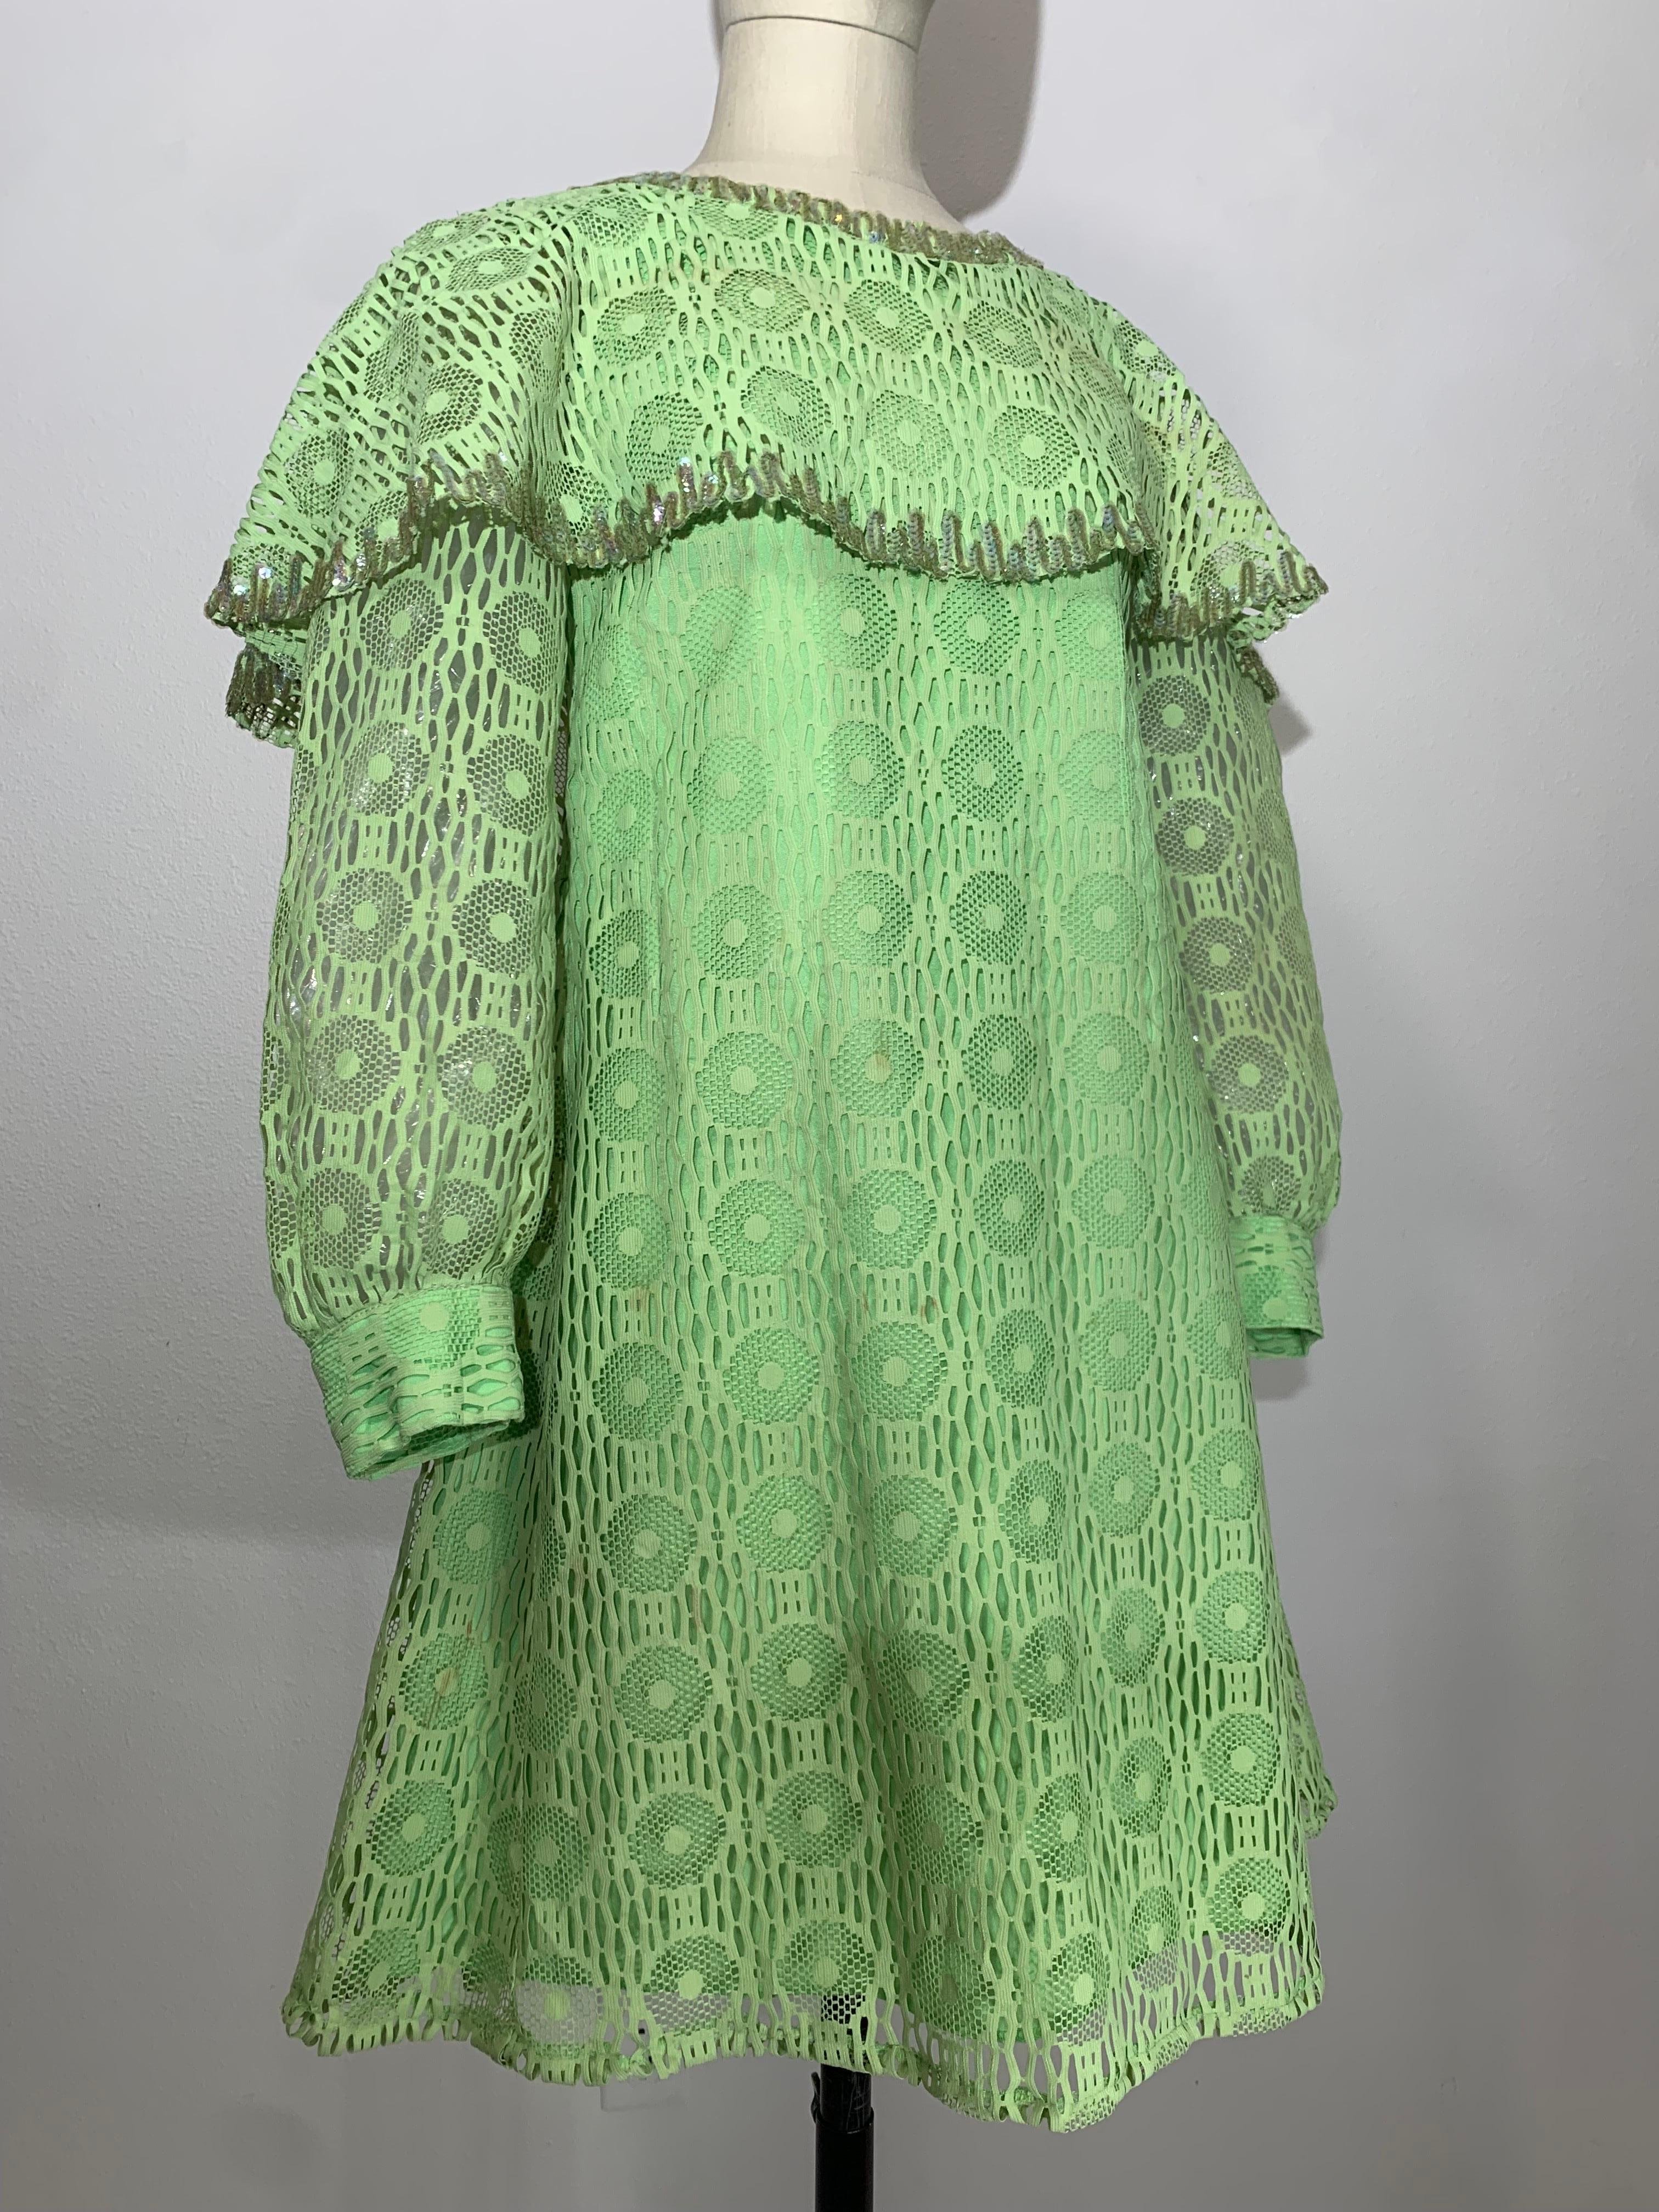 1960s Lime Green Net Lace Baby Doll Mod Mini Dress w Caplet & Banded Cuffs: A-line silhouette, fully lined with sheer sleeves and sequin trimmed caplet and cuffs. Fits up to US size 8.